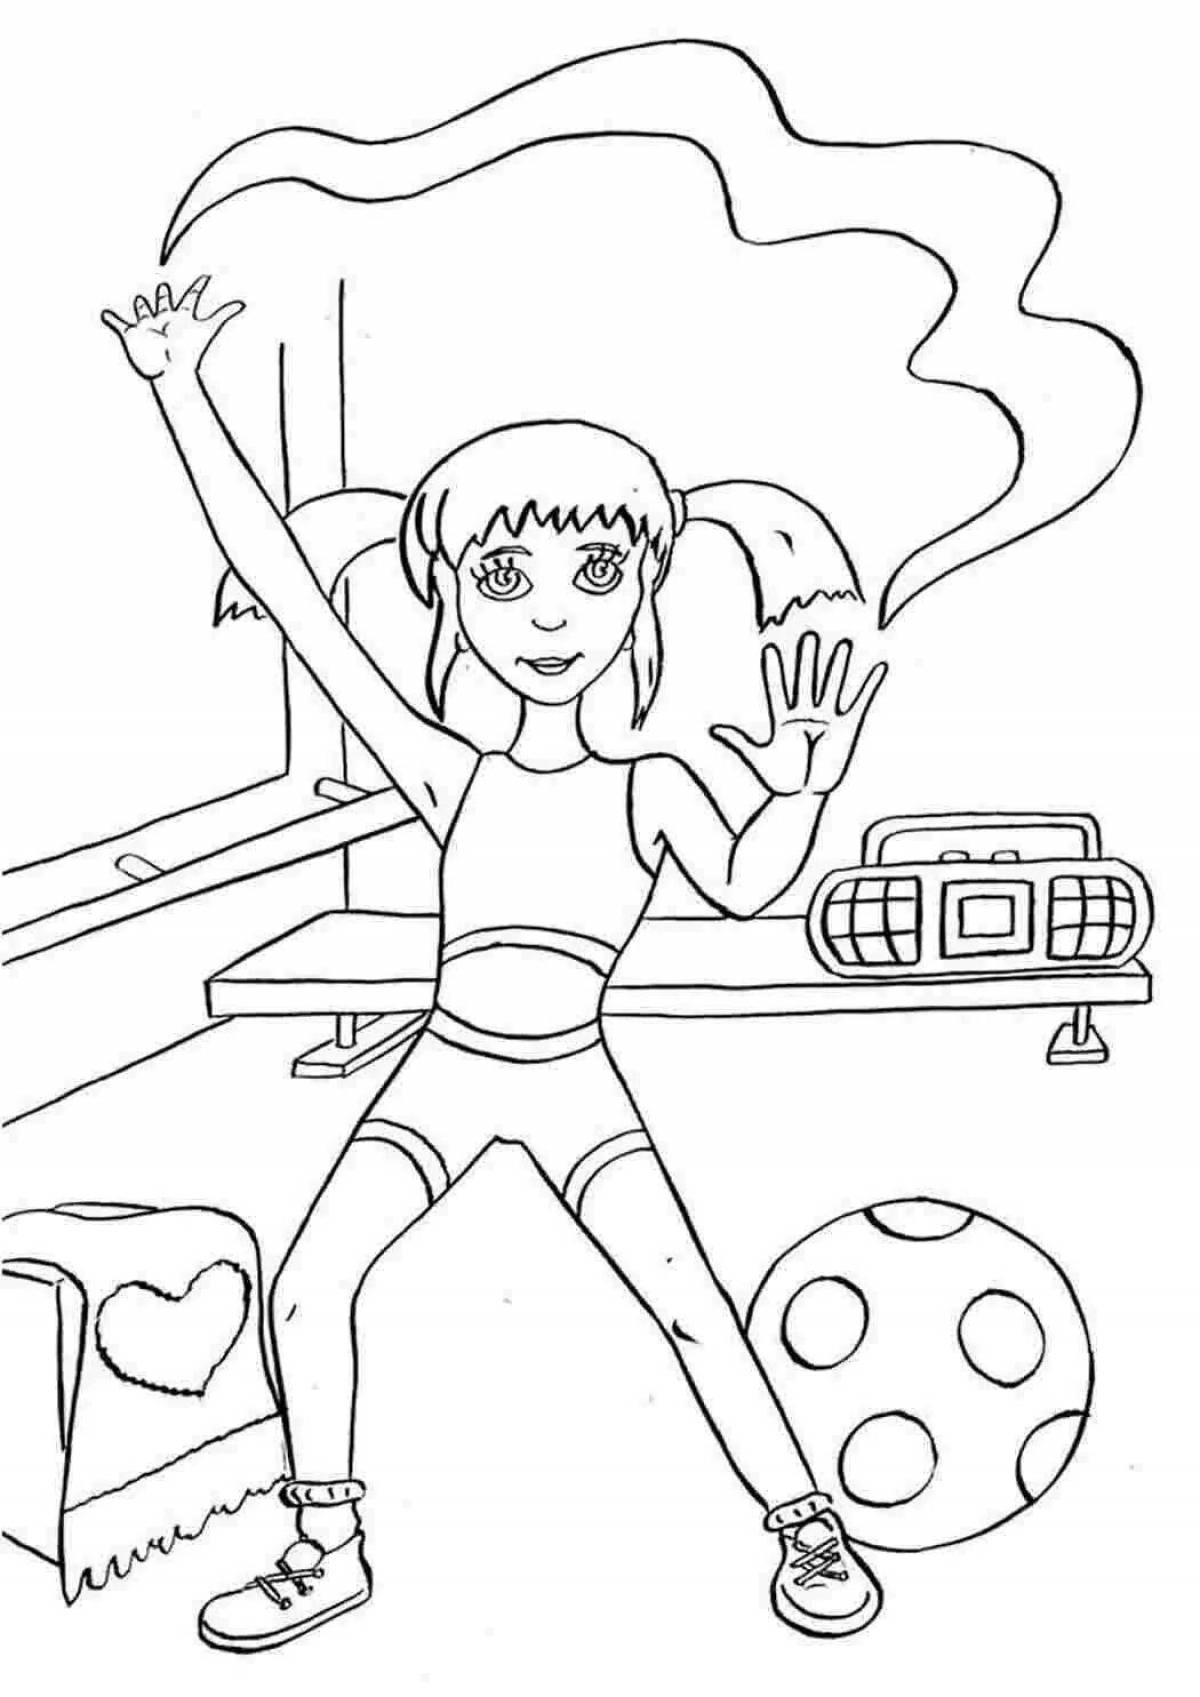 Fun health coloring page for children